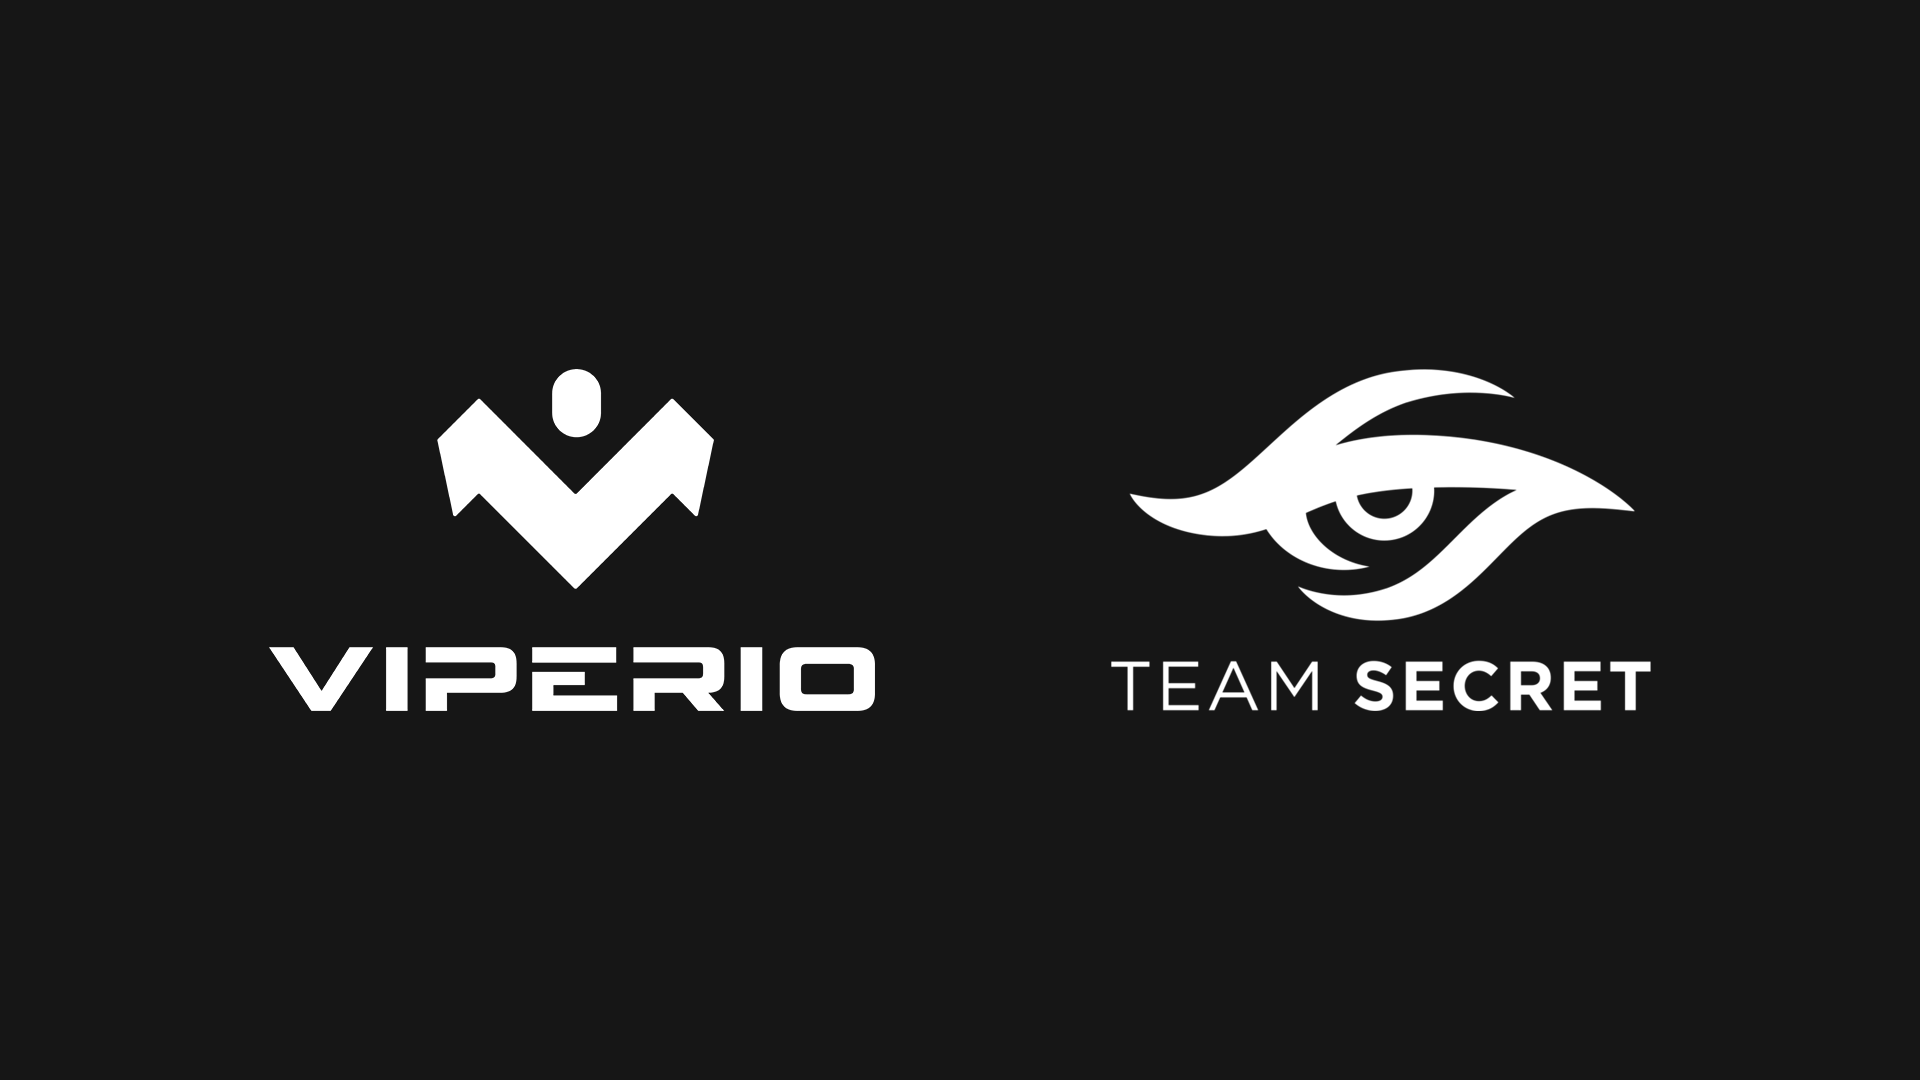 Viperio 86 players Gruby and ASTRO transferred to Team Secret